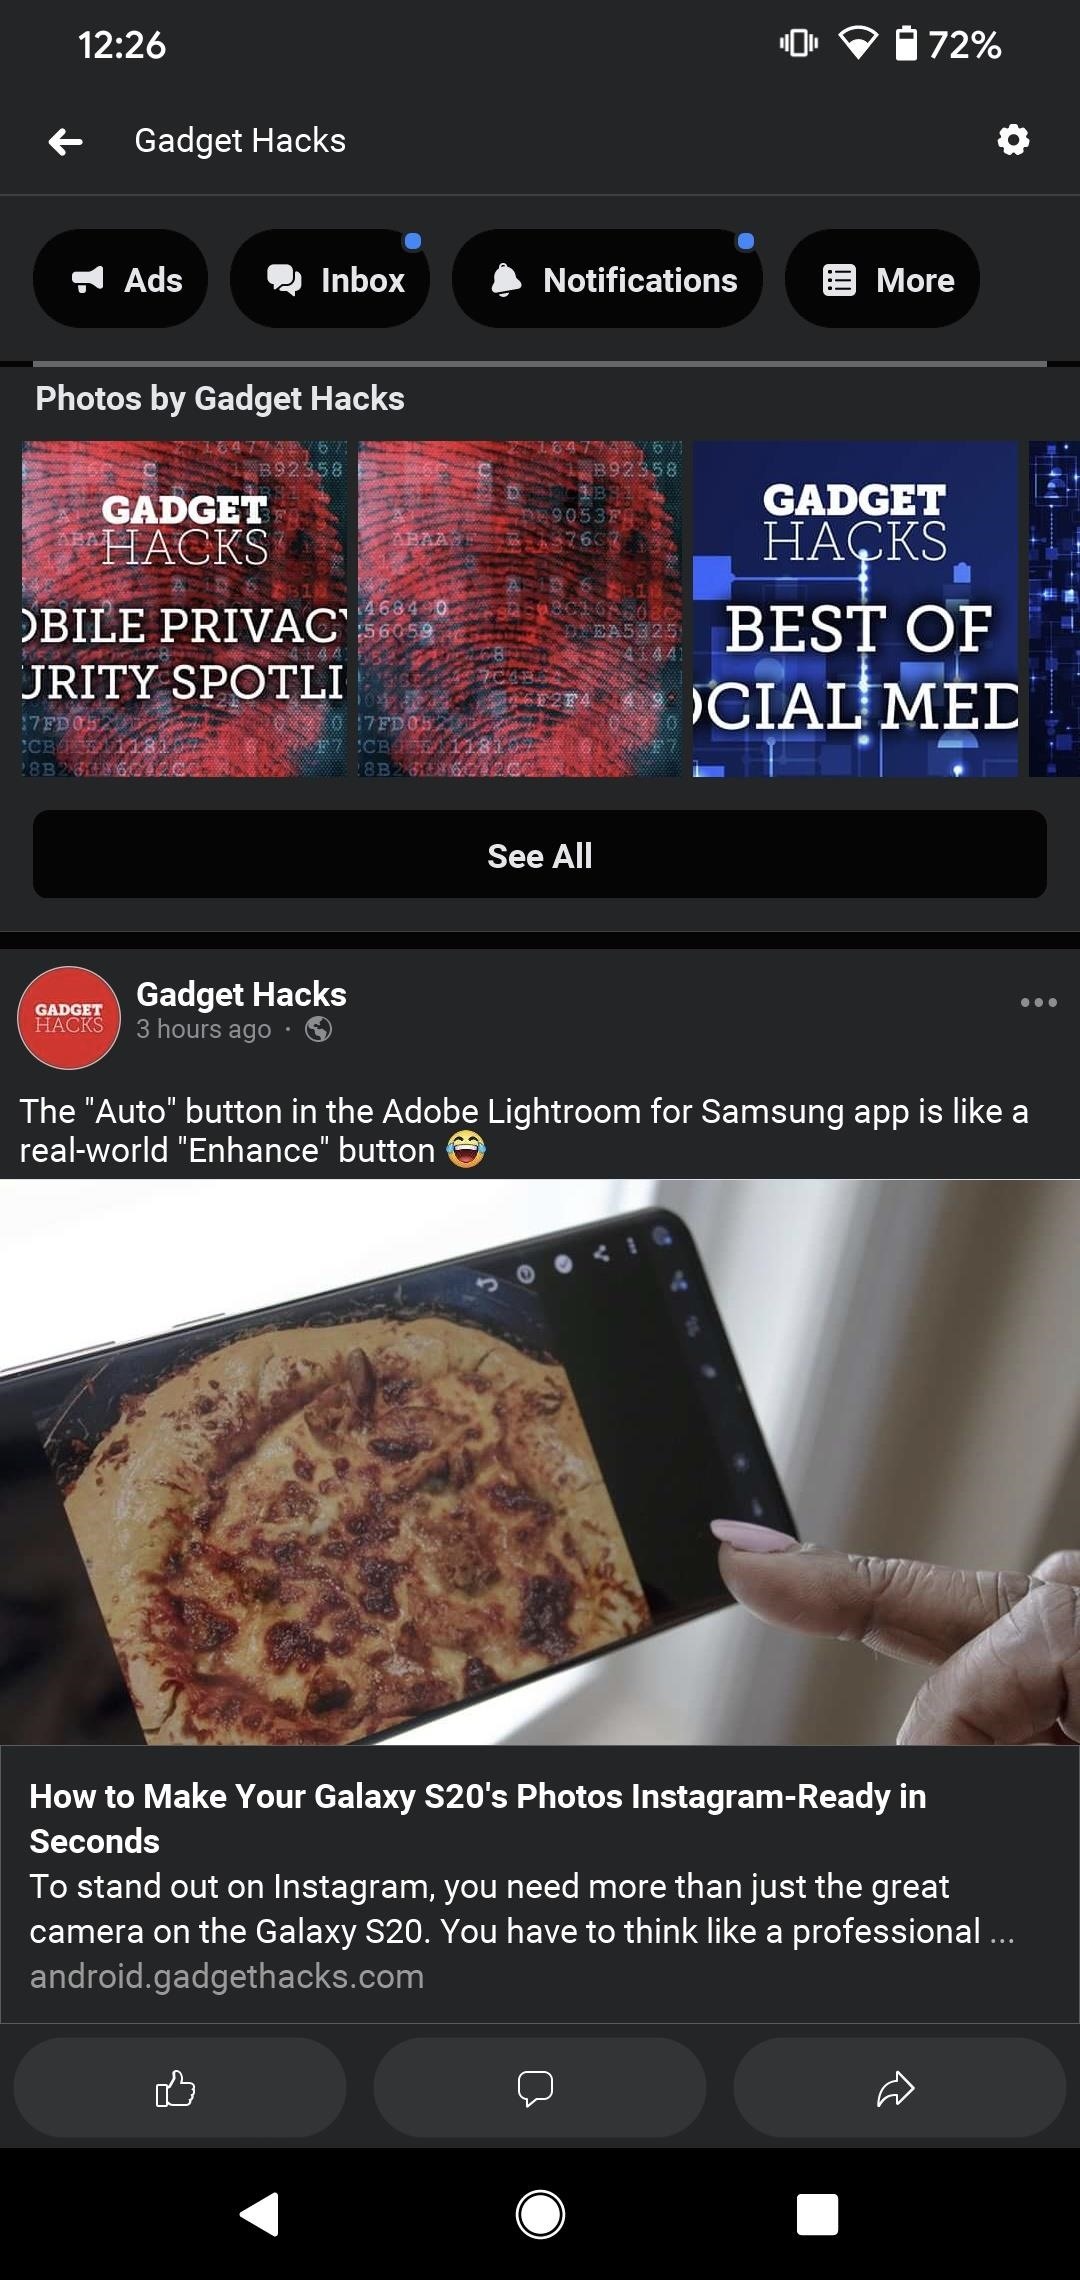 How to Enable Dark Mode in Facebook's iOS & Android Apps